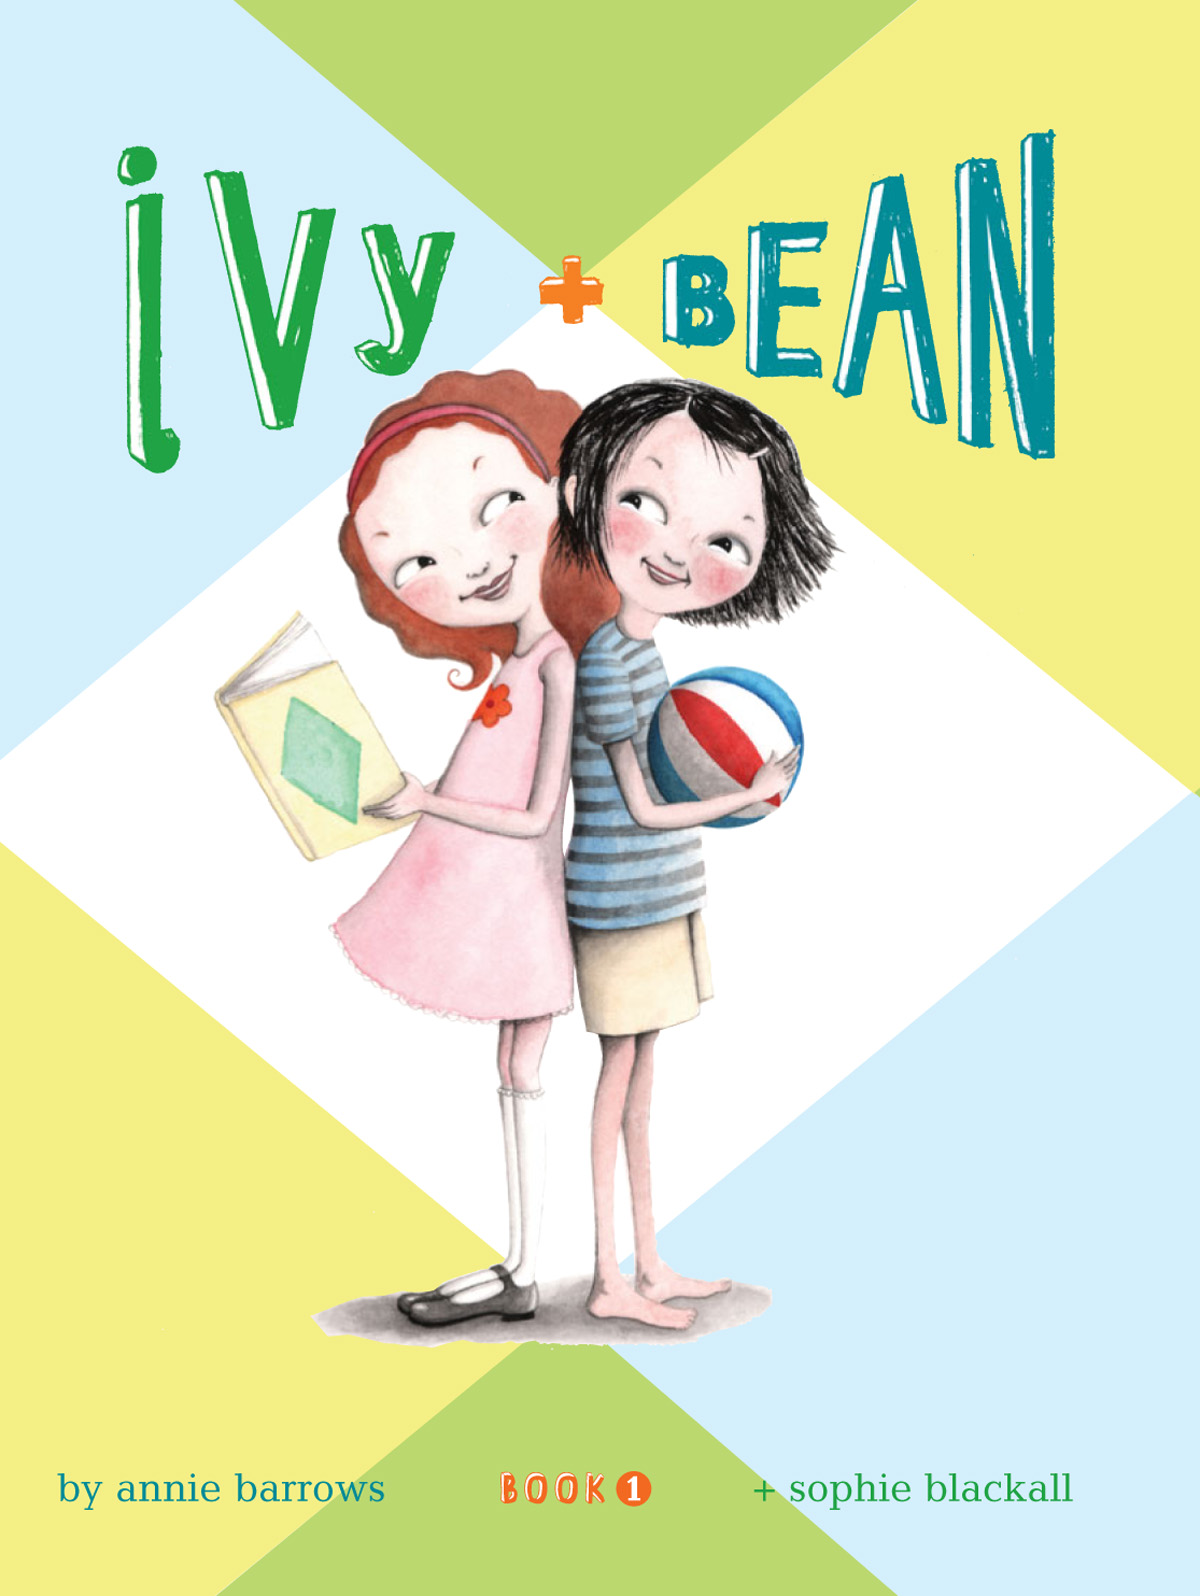 Ivy and Bean (2006) by Annie Barrows